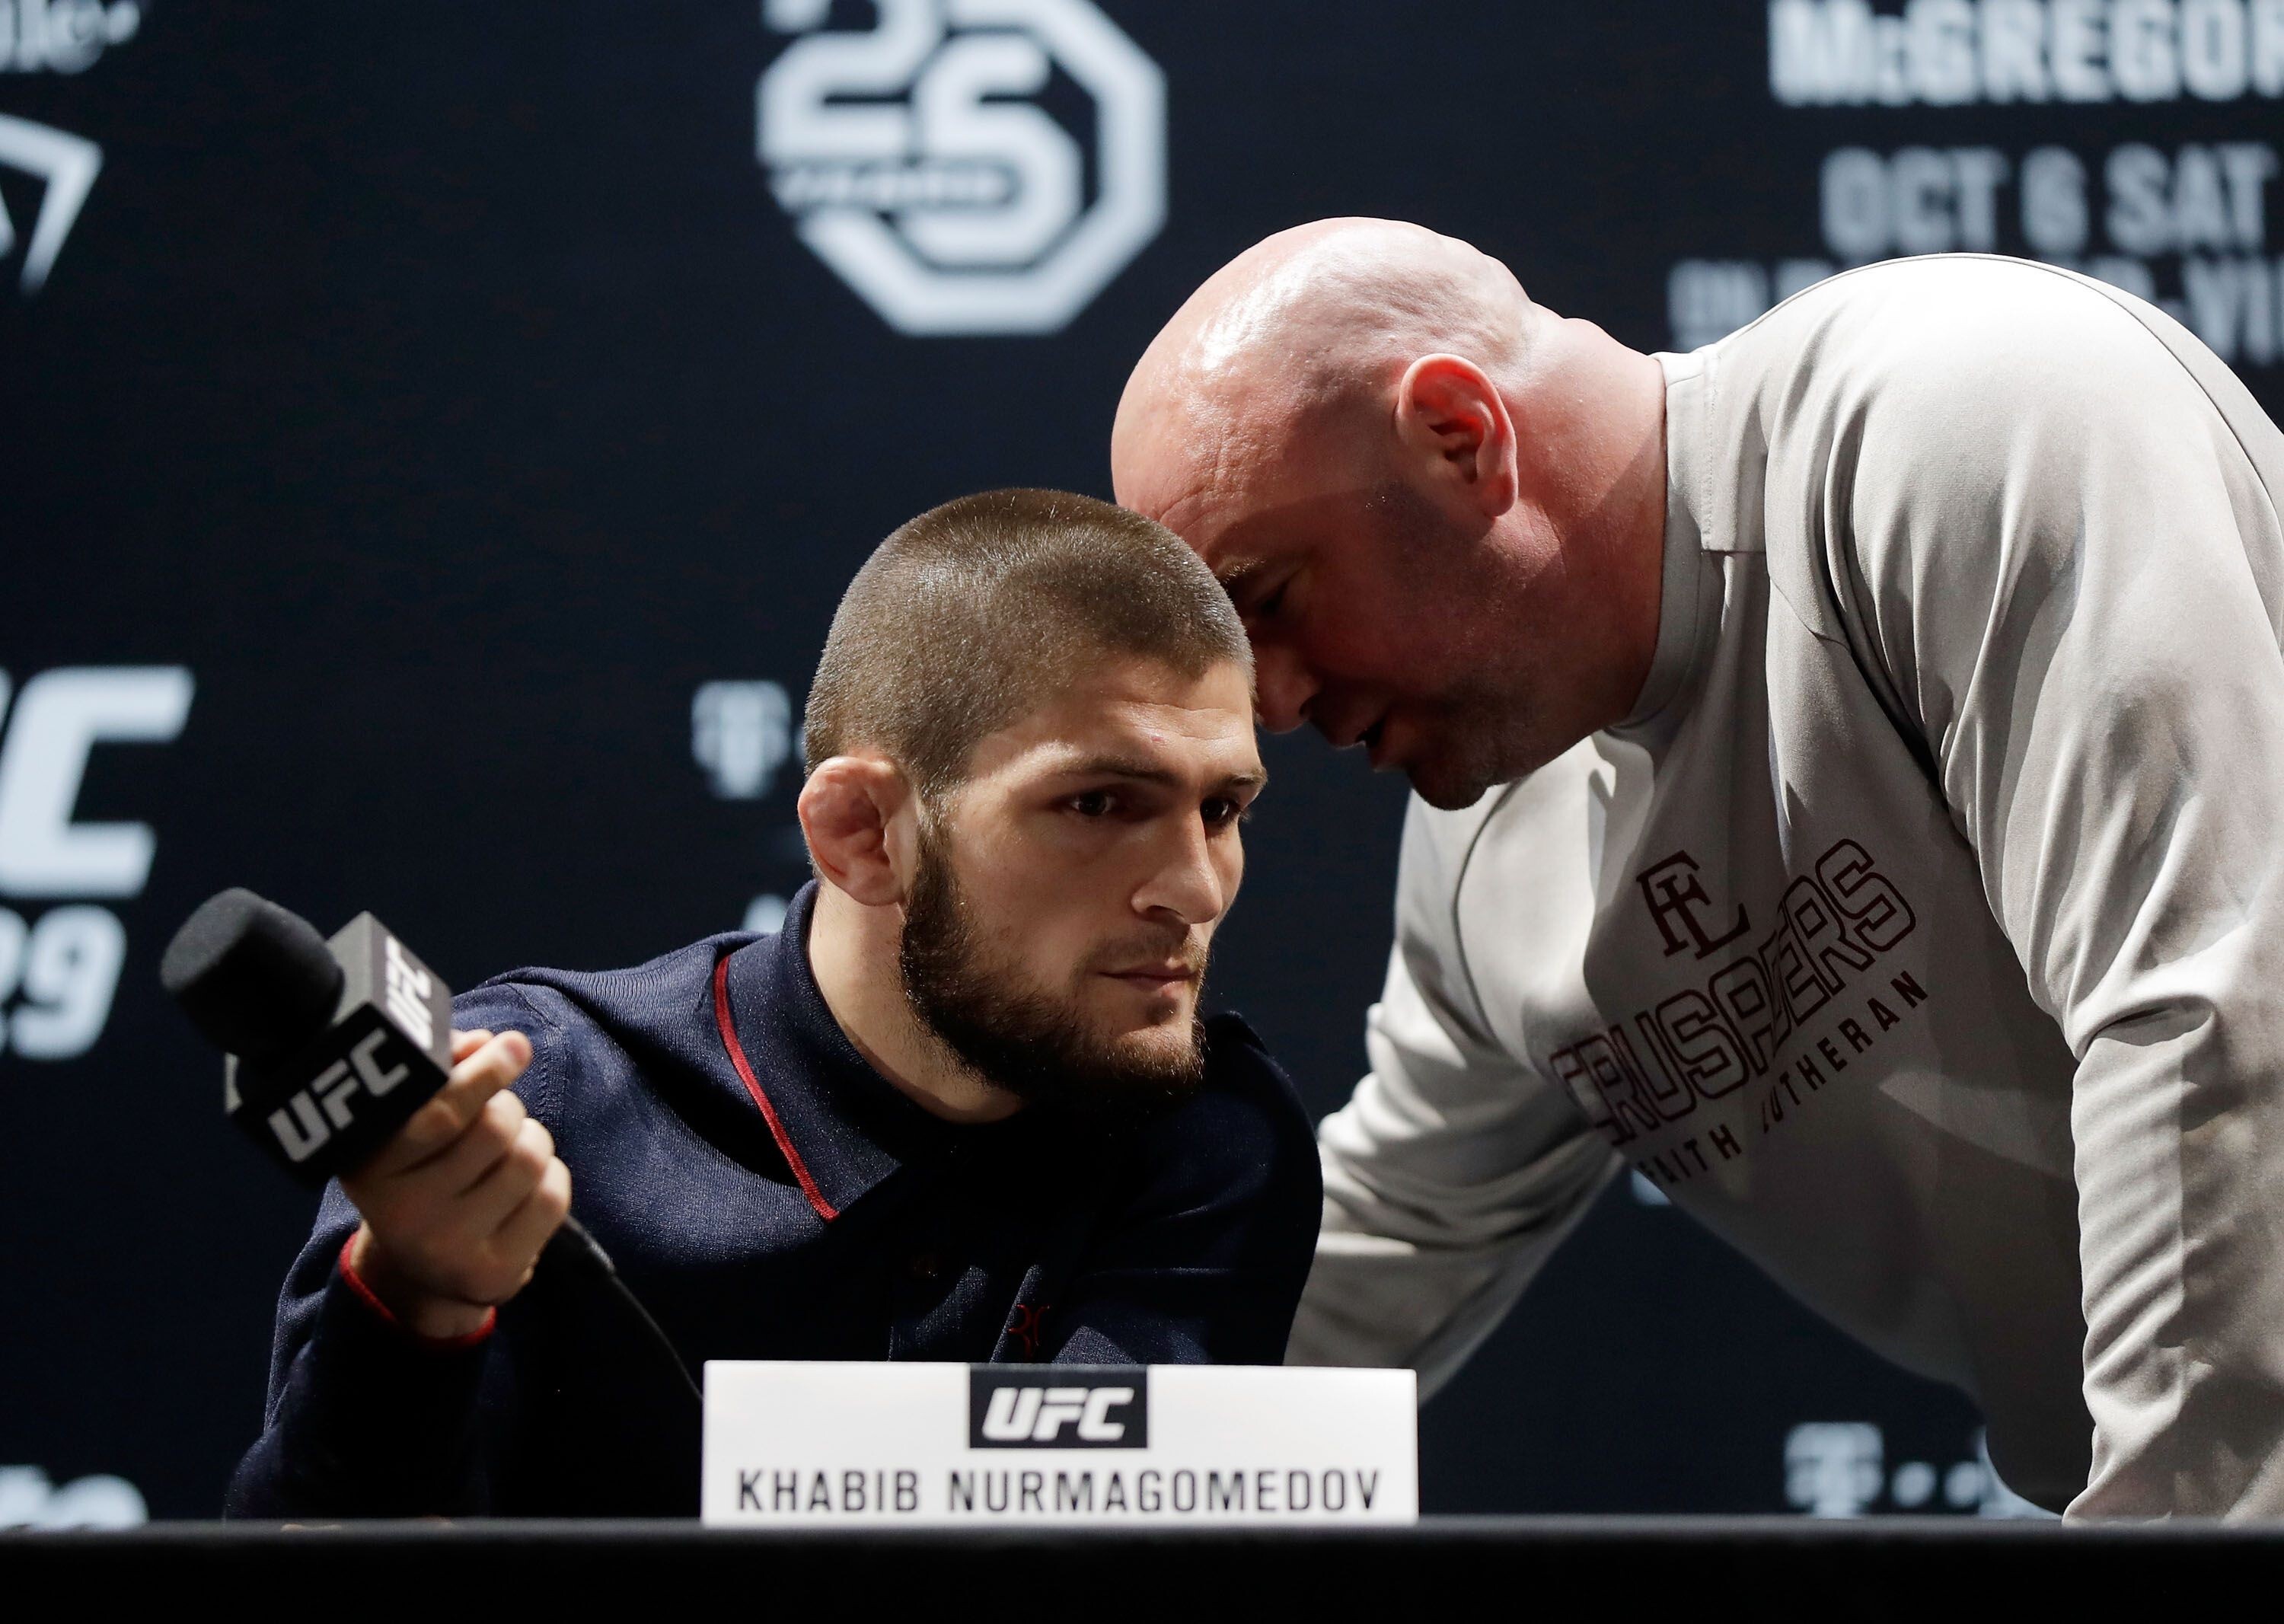 UFC president Dana White speaks to former lightweight champion Khabib Nurmagomedov during a press conference for UFC 229 in Las Vegas in 2018. Photo: AFP